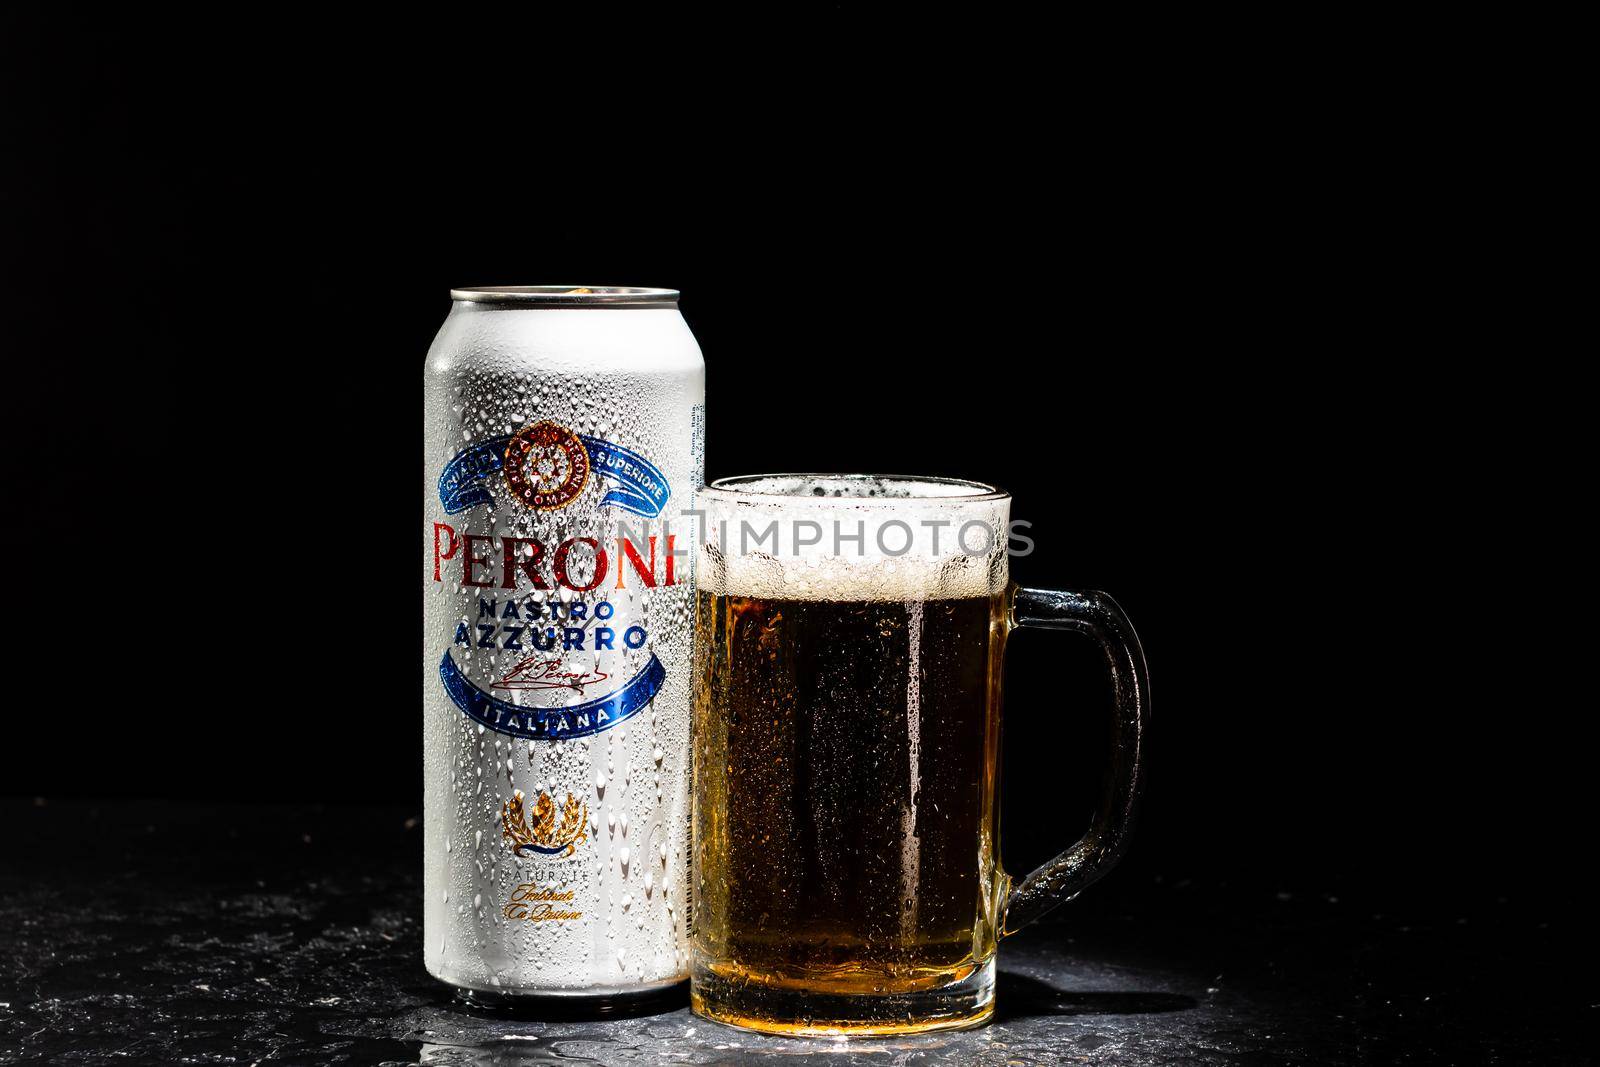 Can of Peroni Nastro Azzurro beer and beer glass on dark background. Illustrative editorial photo shot in Bucharest, Romania, 2021 by vladispas